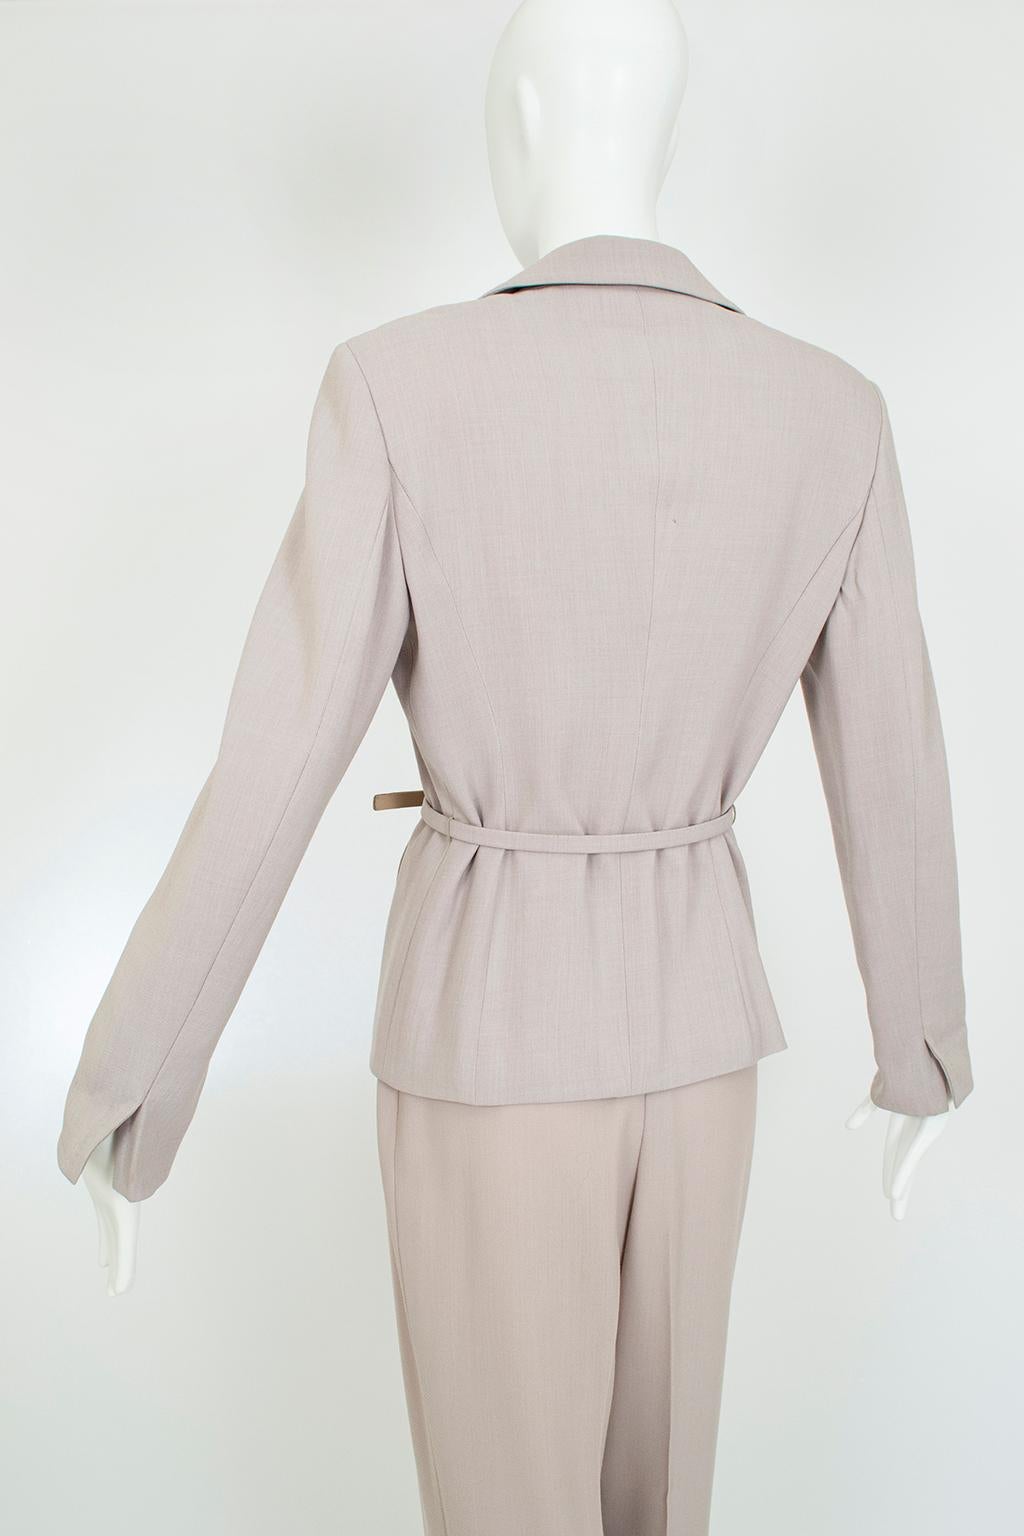 Max Mara Taupe Wool and Silk Crêpe Belted Pant Suit - It 40 – 42, 1990s For Sale 1